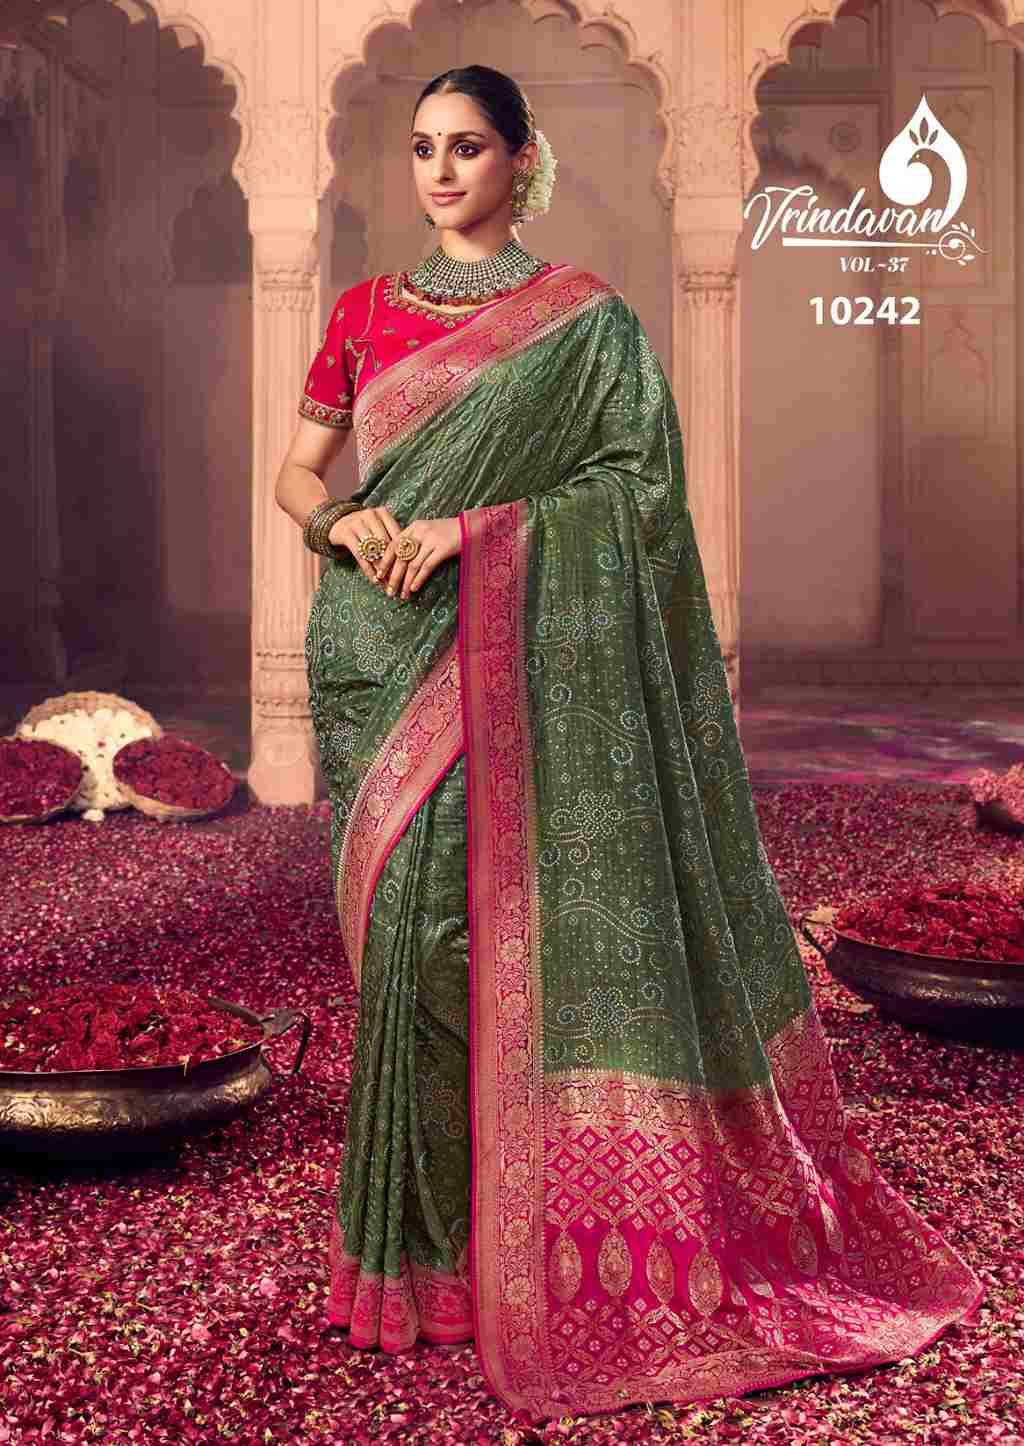 Vrindavan Vol-37 By Vrindavan 10240 To 10248 Series Indian Traditional Wear Collection Beautiful Stylish Fancy Colorful Party Wear & Occasional Wear Dola Silk Sarees At Wholesale Price